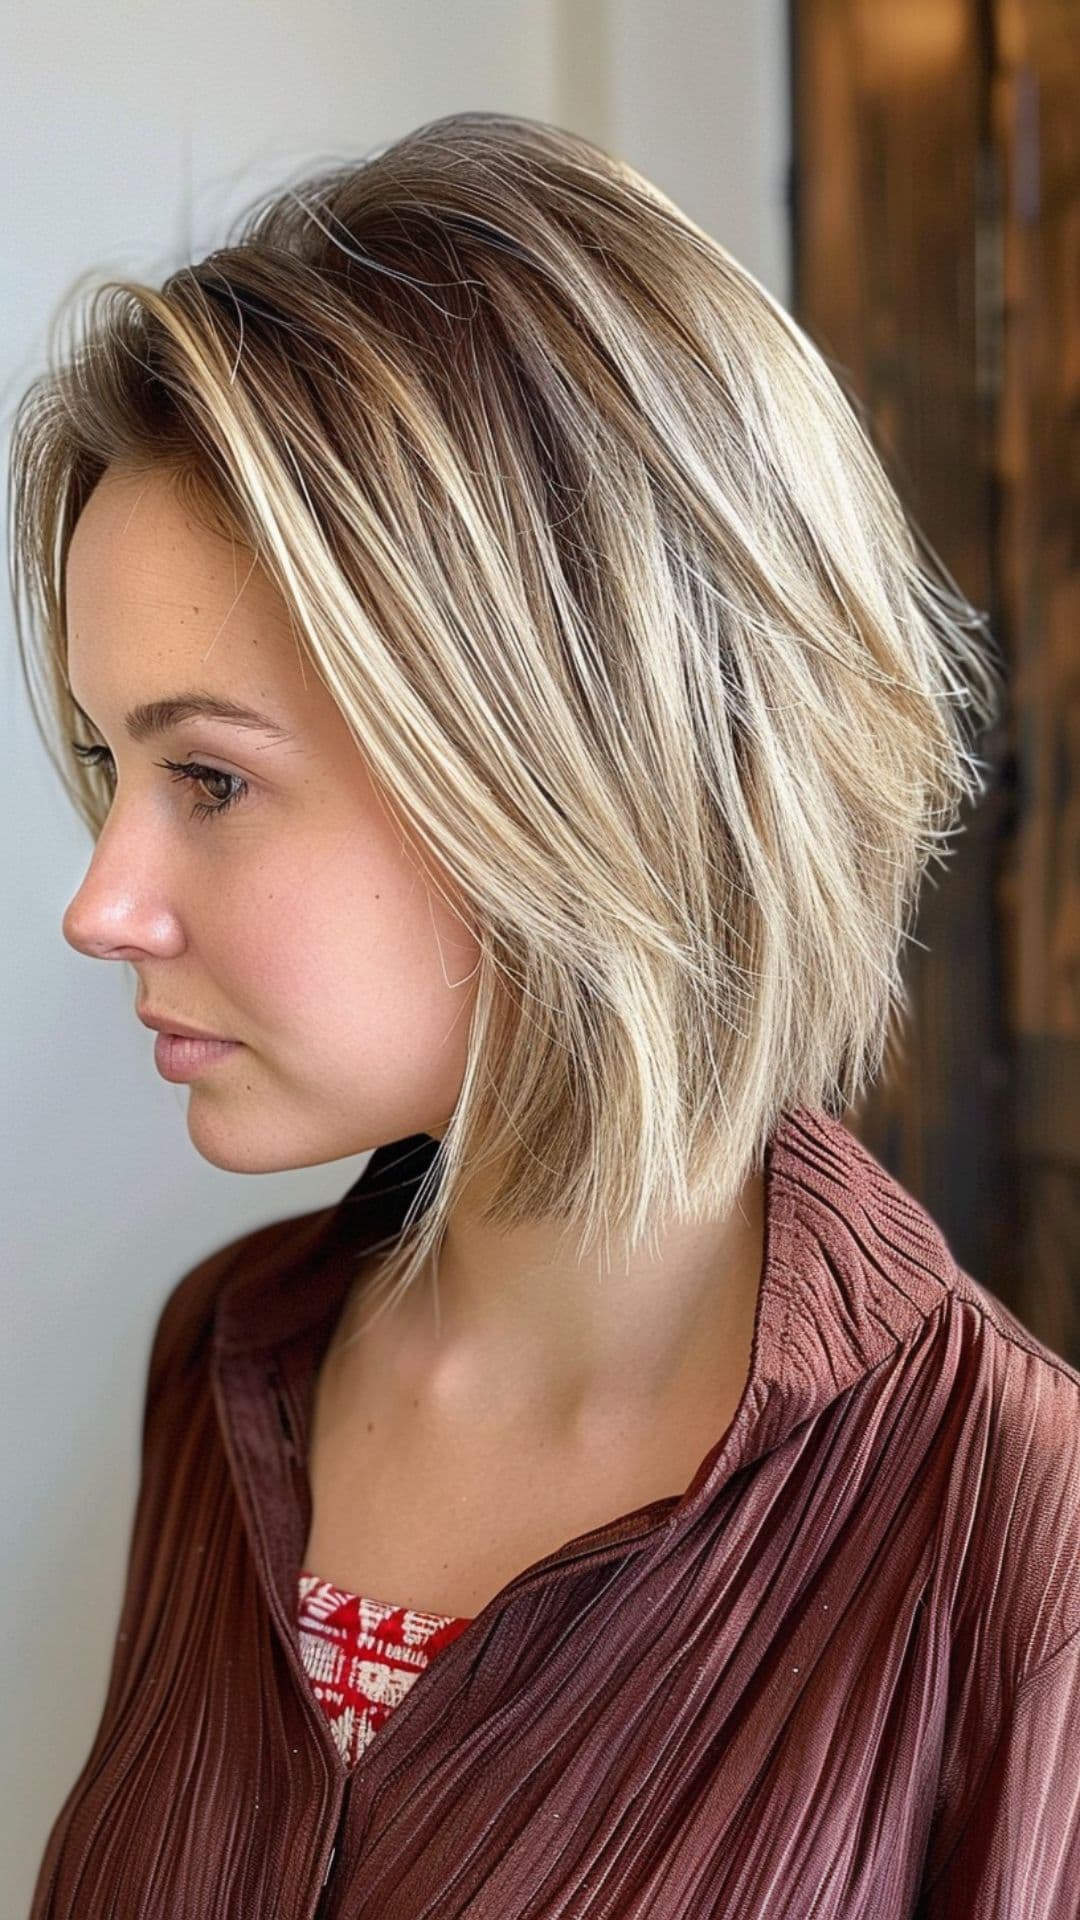 A woman modelling an inverted bob for round faces haircut.